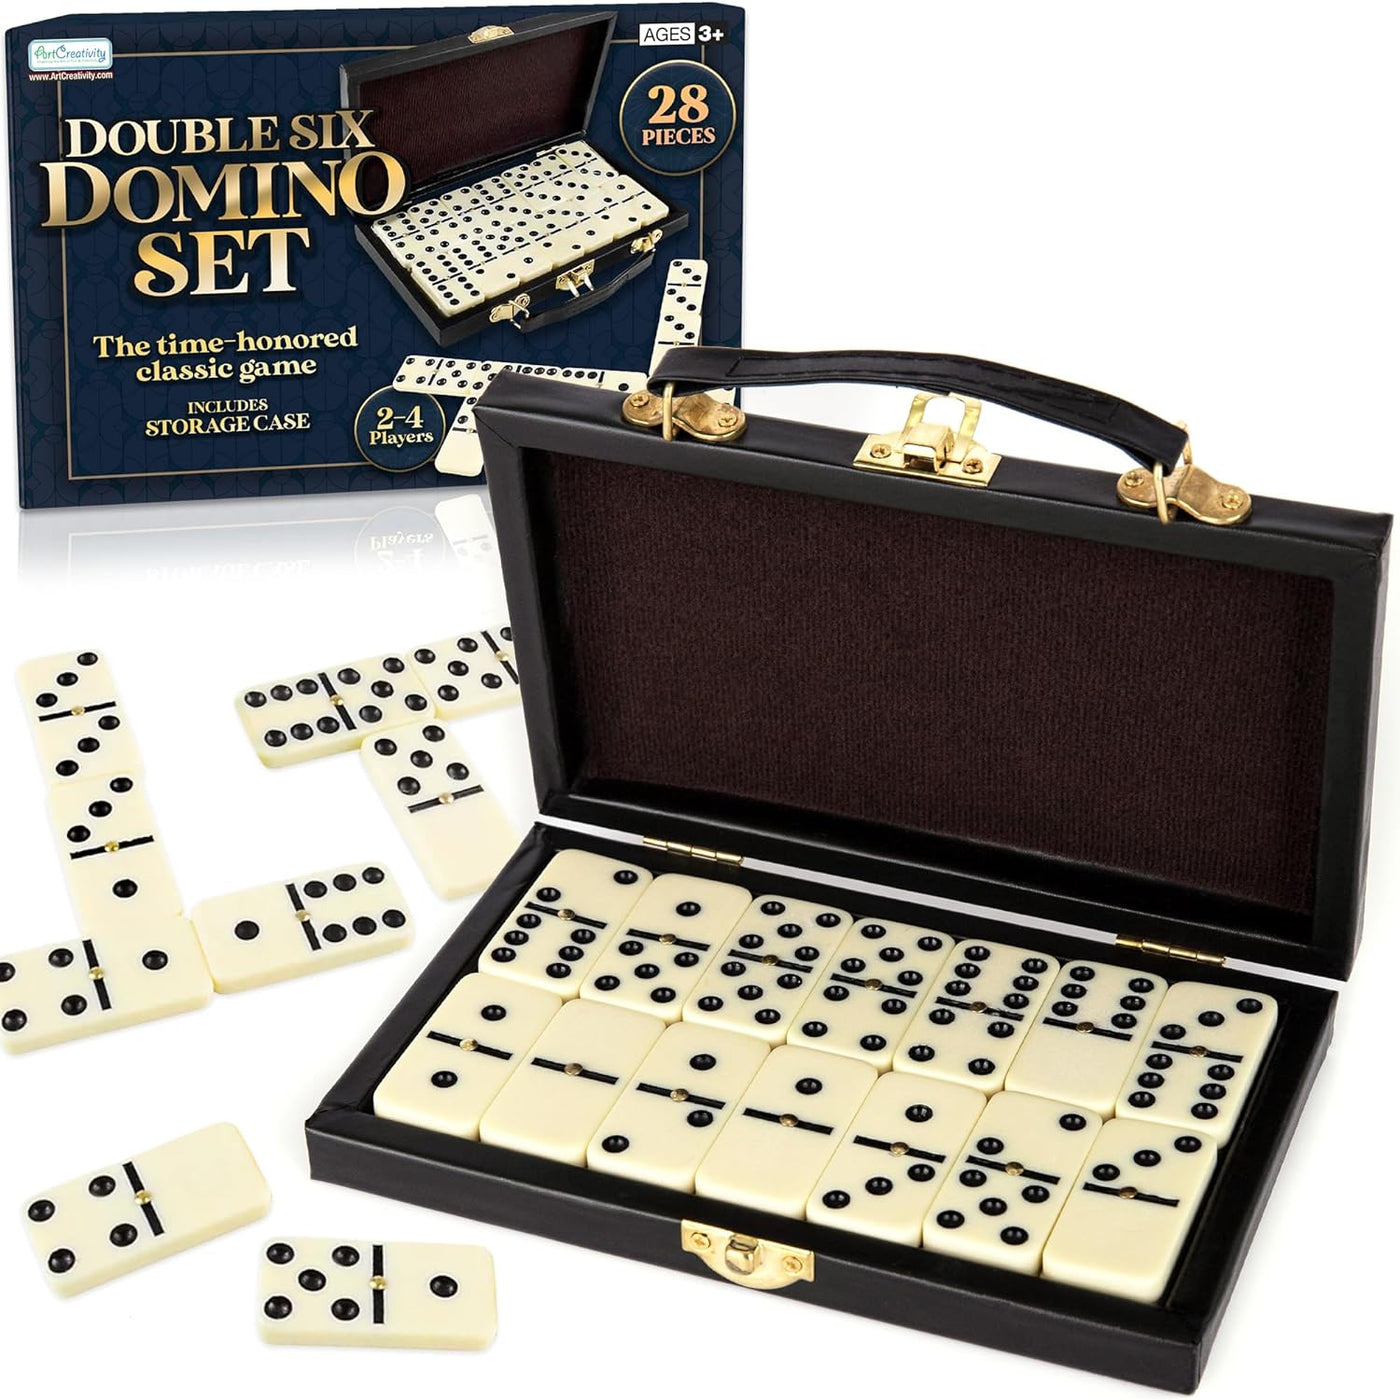 Double Six Dominoes Game in Faux Leather Case, 28 Dominos Tiles for Kids, Fun Educational Toy Classroom Kit, Classic Set of Dominoes for Travel in Gift Box